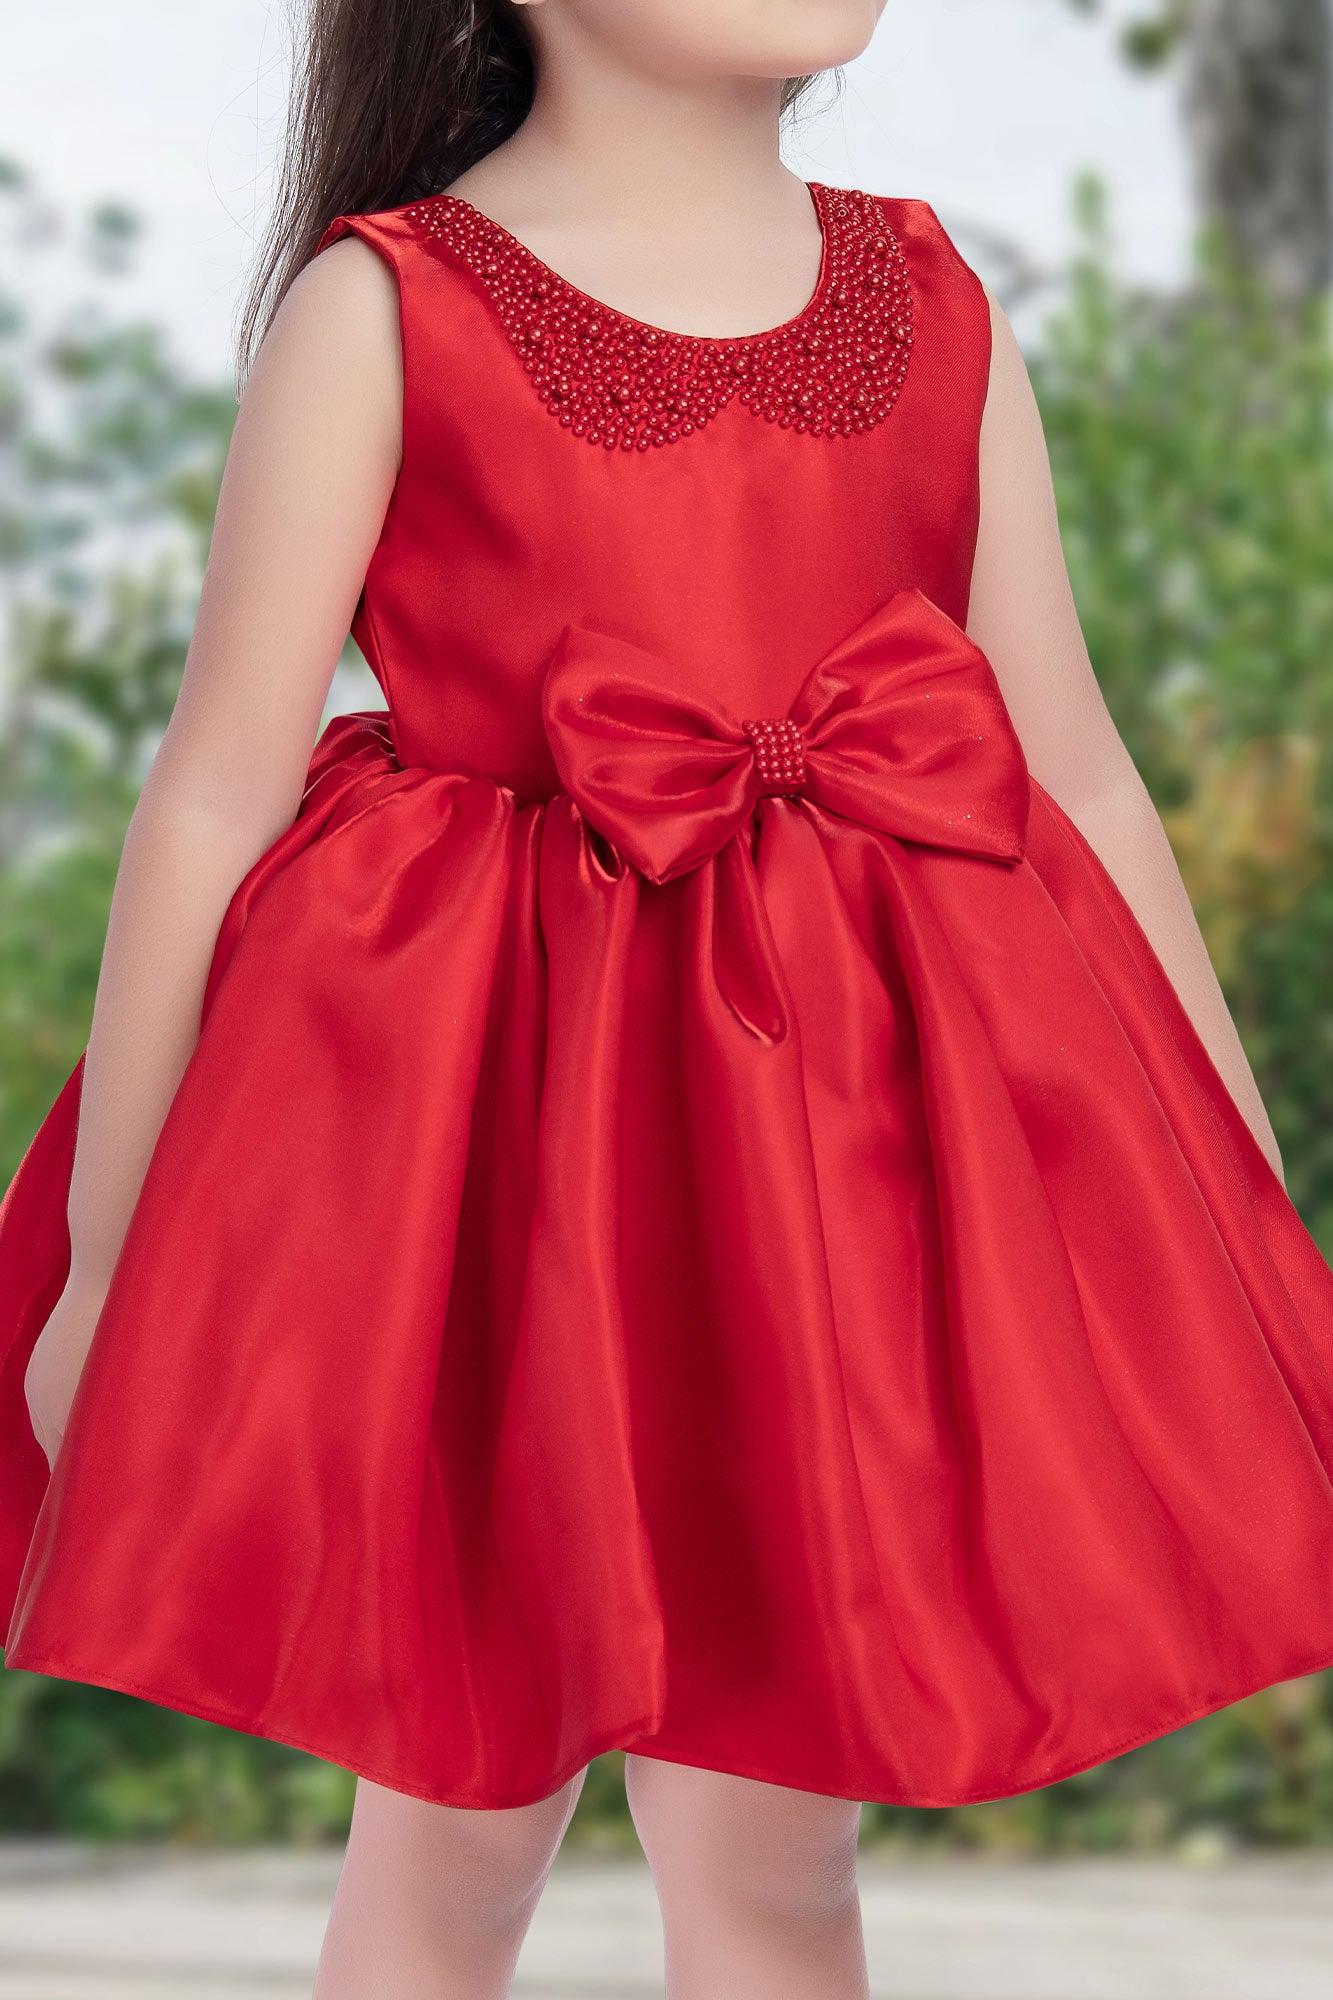 Red Party Wear Frock for Girls - All Eyes on Her! - Lagorii Kids